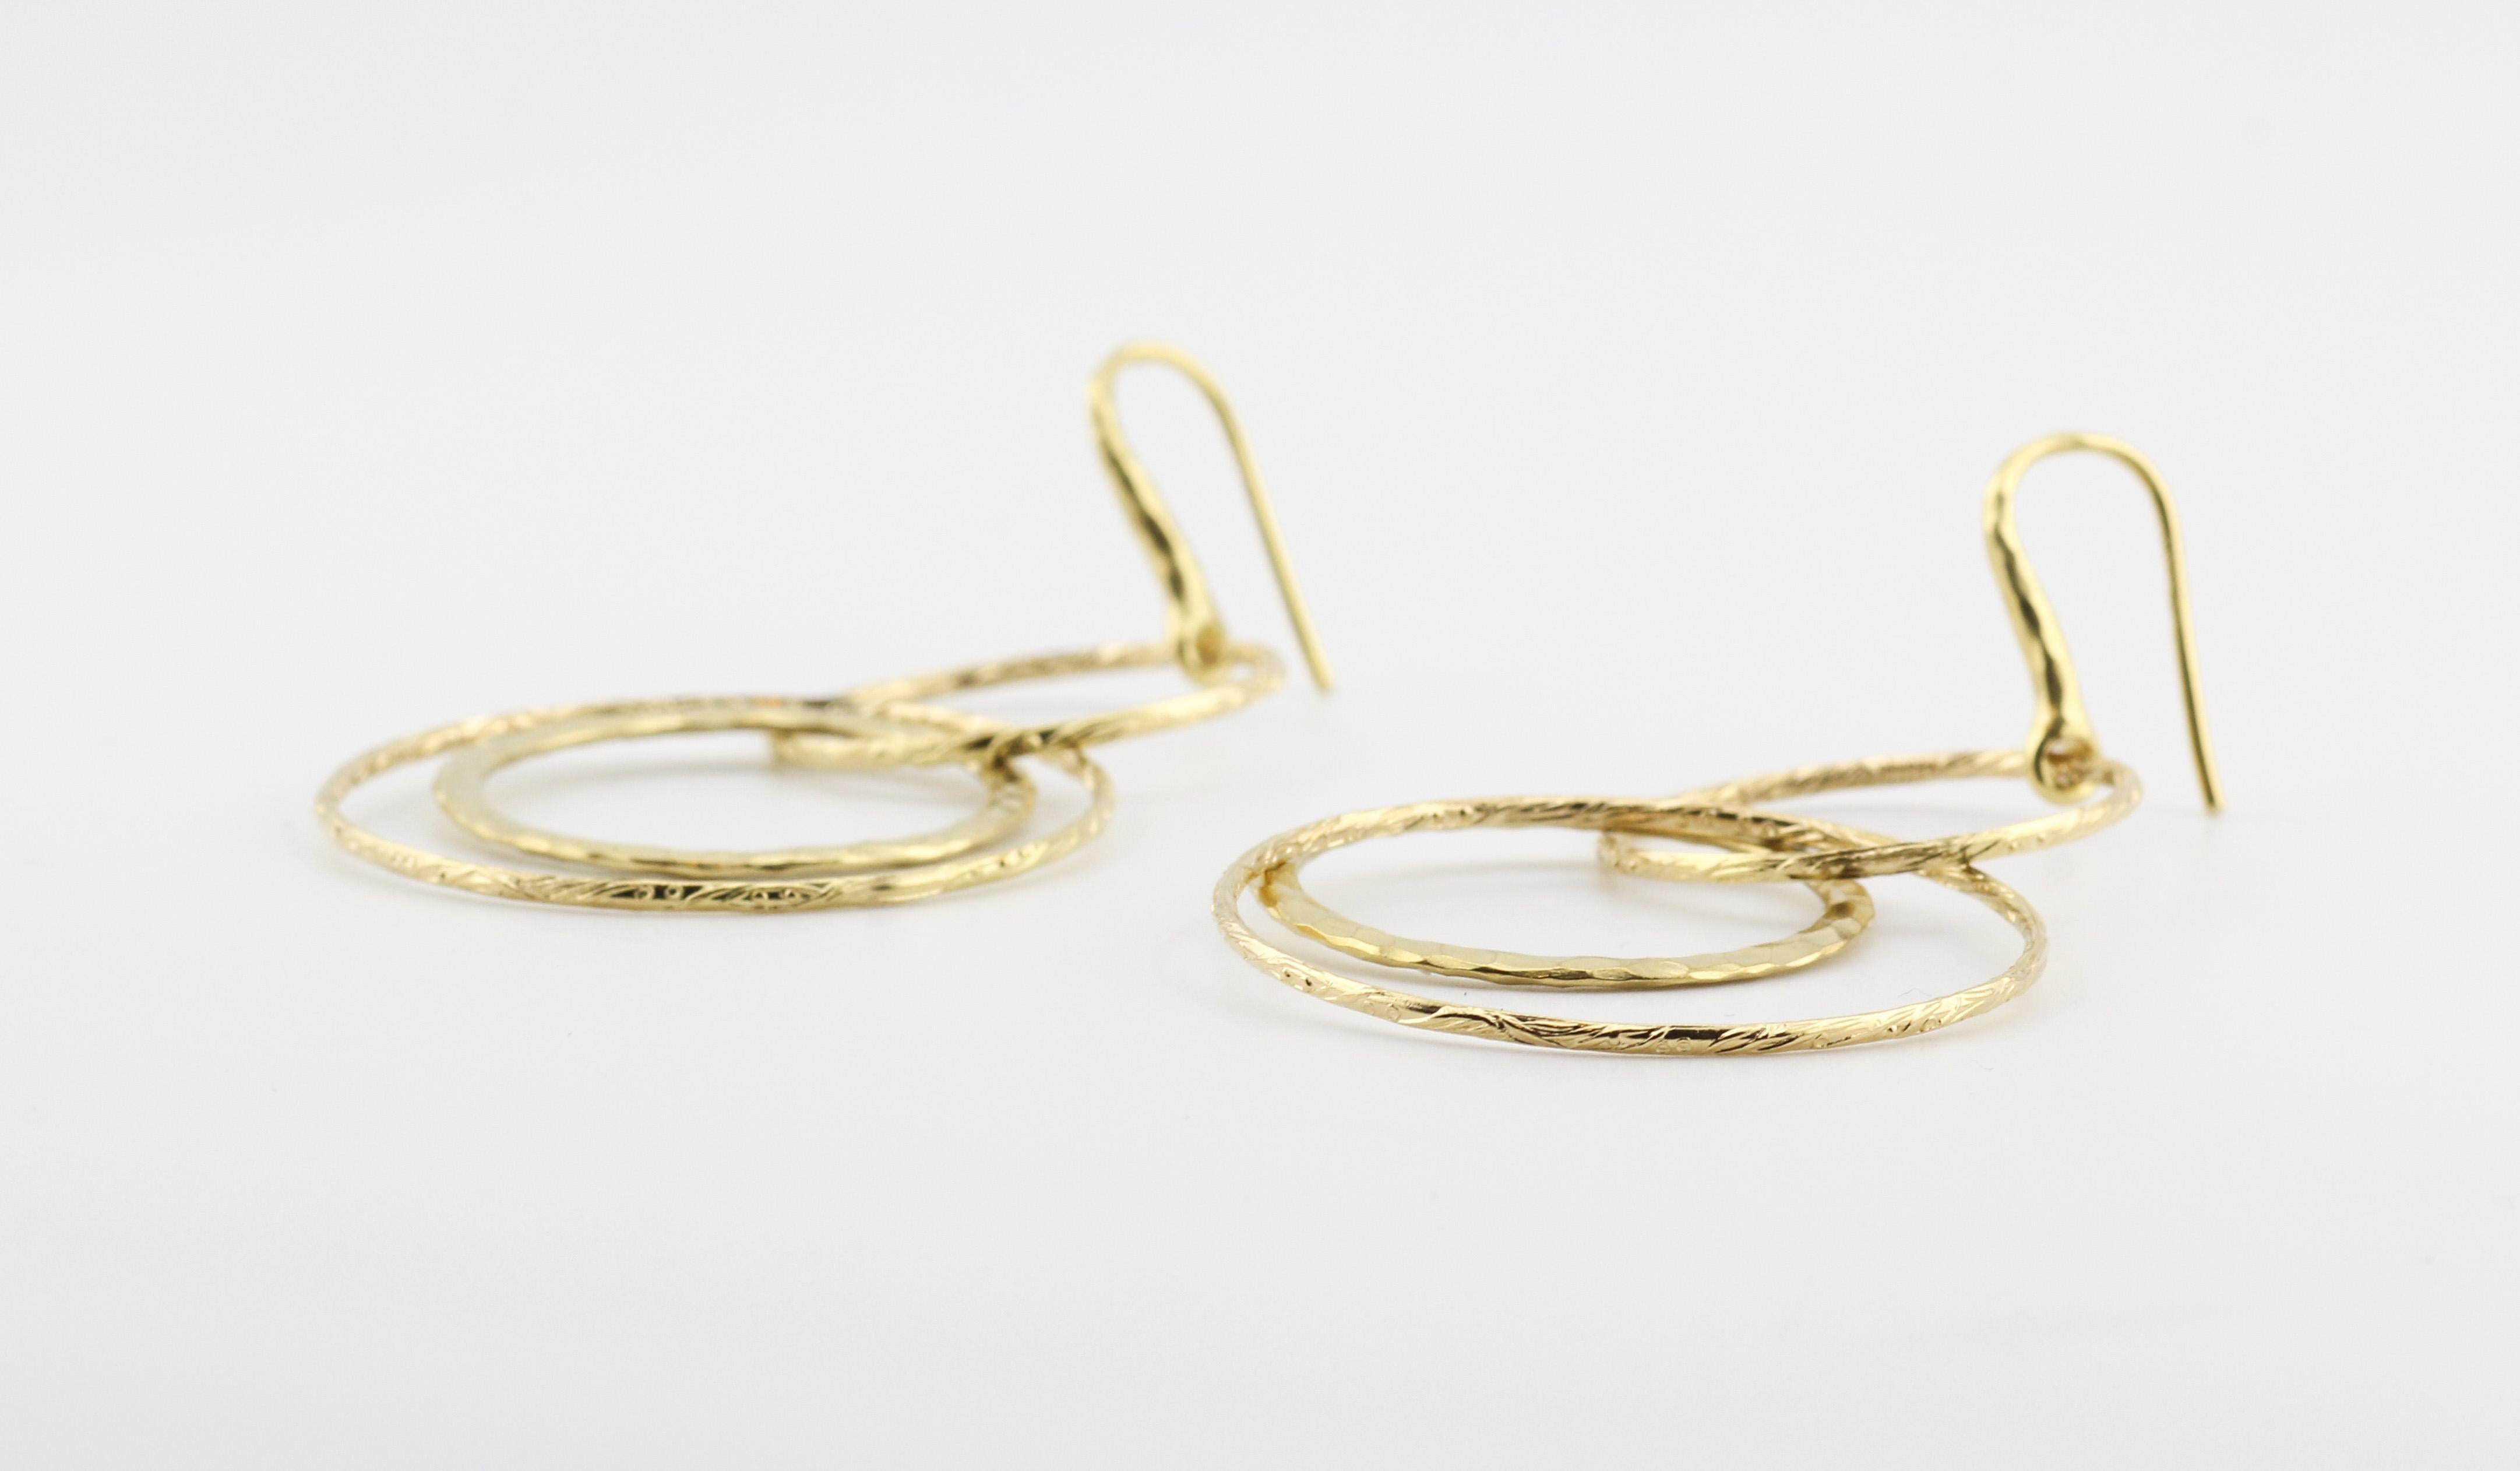 Enter the realm of artistic elegance with the Tiffany & Co. Picasso 18K Gold Hammered Circles Dangle Earrings—a stunning embodiment of creativity and craftsmanship. Crafted under the design influence of the renowned artist Pablo Picasso, these